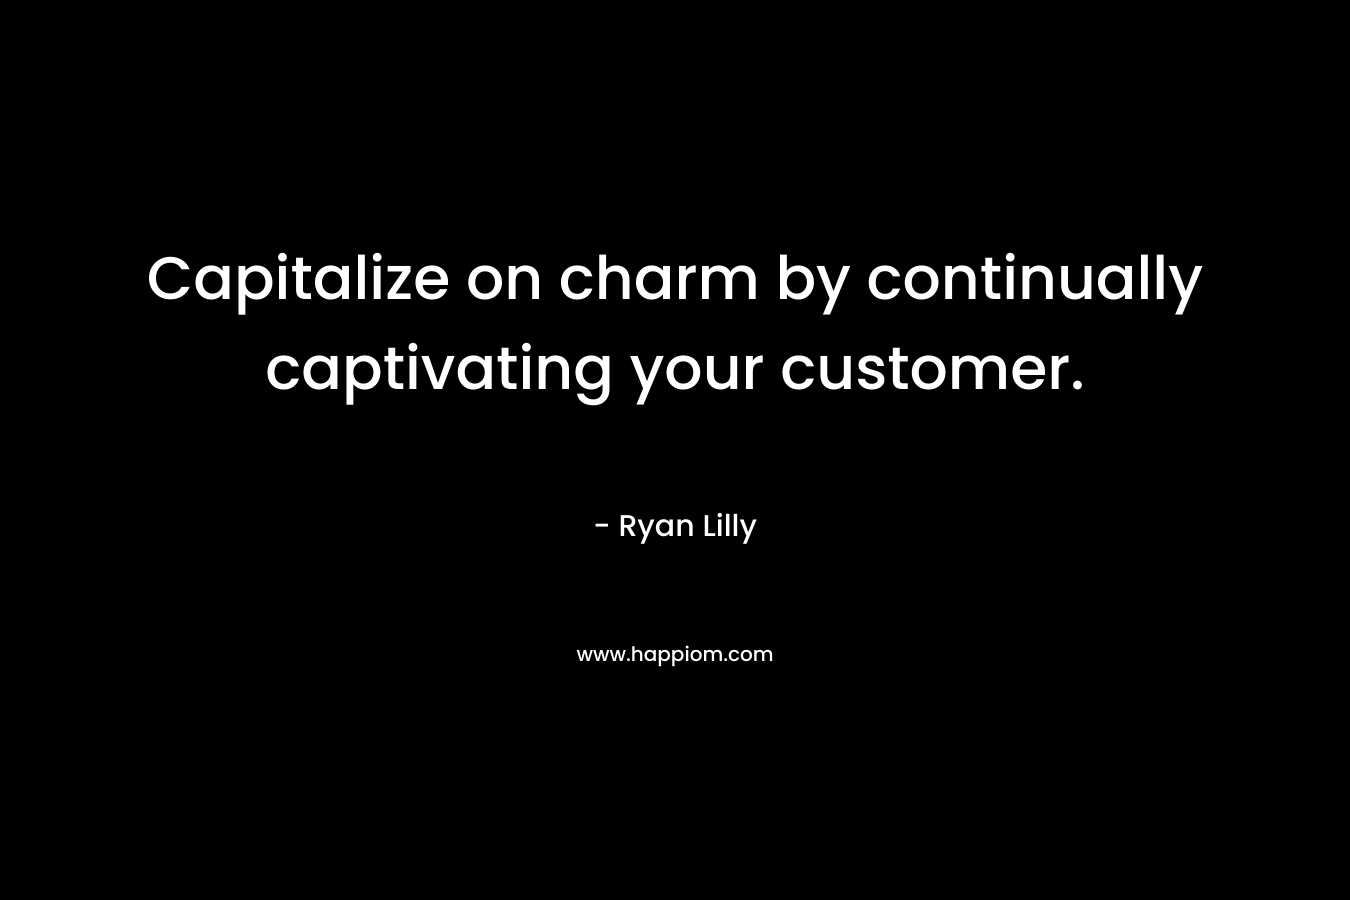 Capitalize on charm by continually captivating your customer. – Ryan Lilly